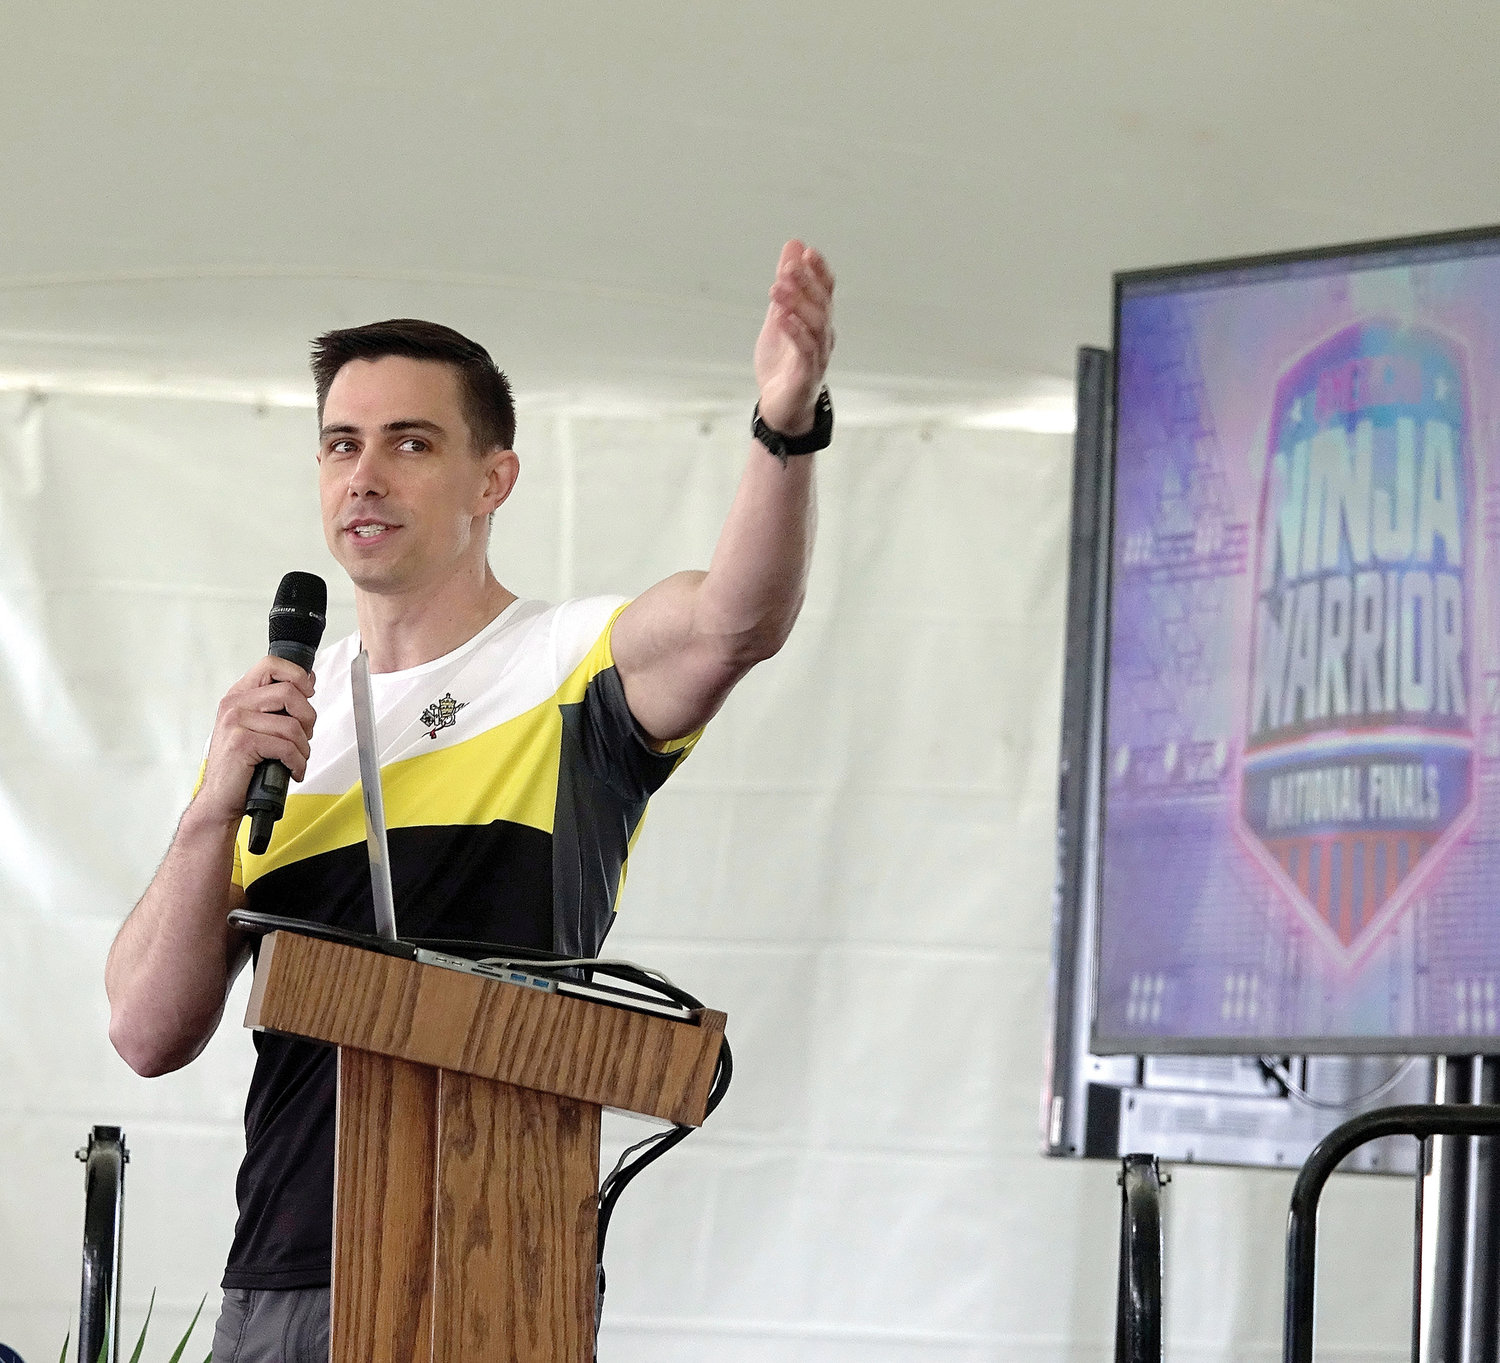 Sean Bryan, known as the Papal Ninja from the NBC series “American Ninja Warrior,” delivers one of the keynote talks.